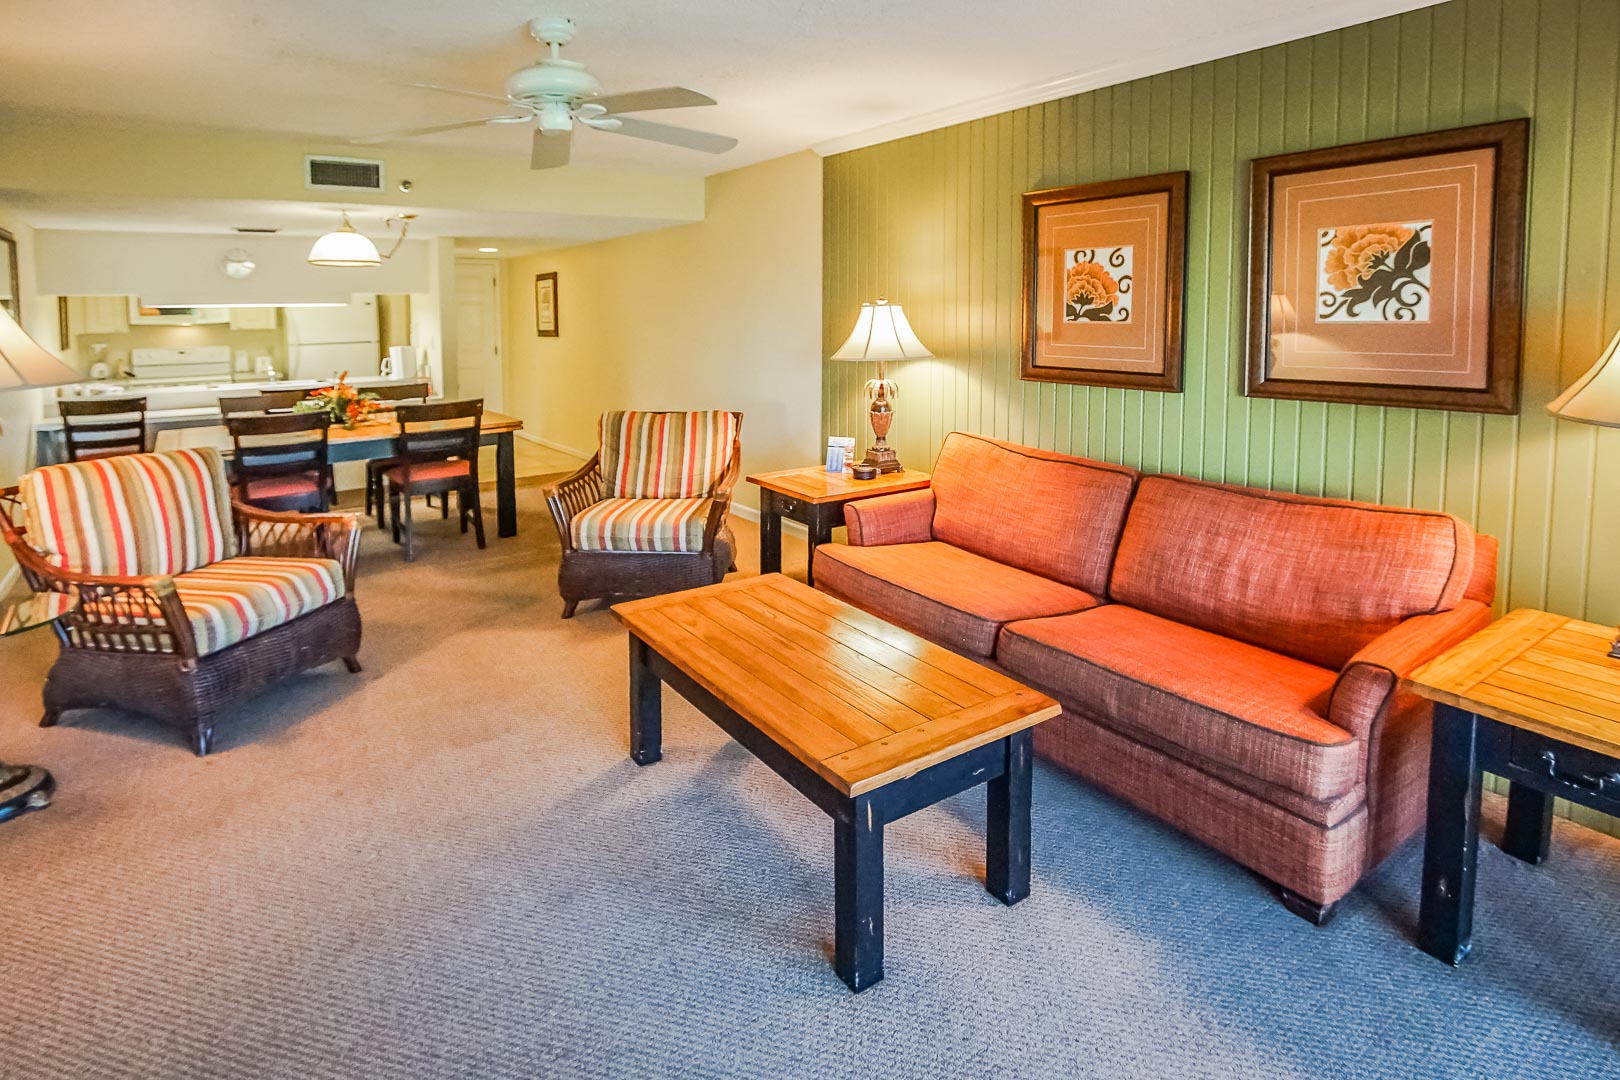 A spacious living room and dining room at VRI's Sand Pebble Resort in Treasure Island, Florida.